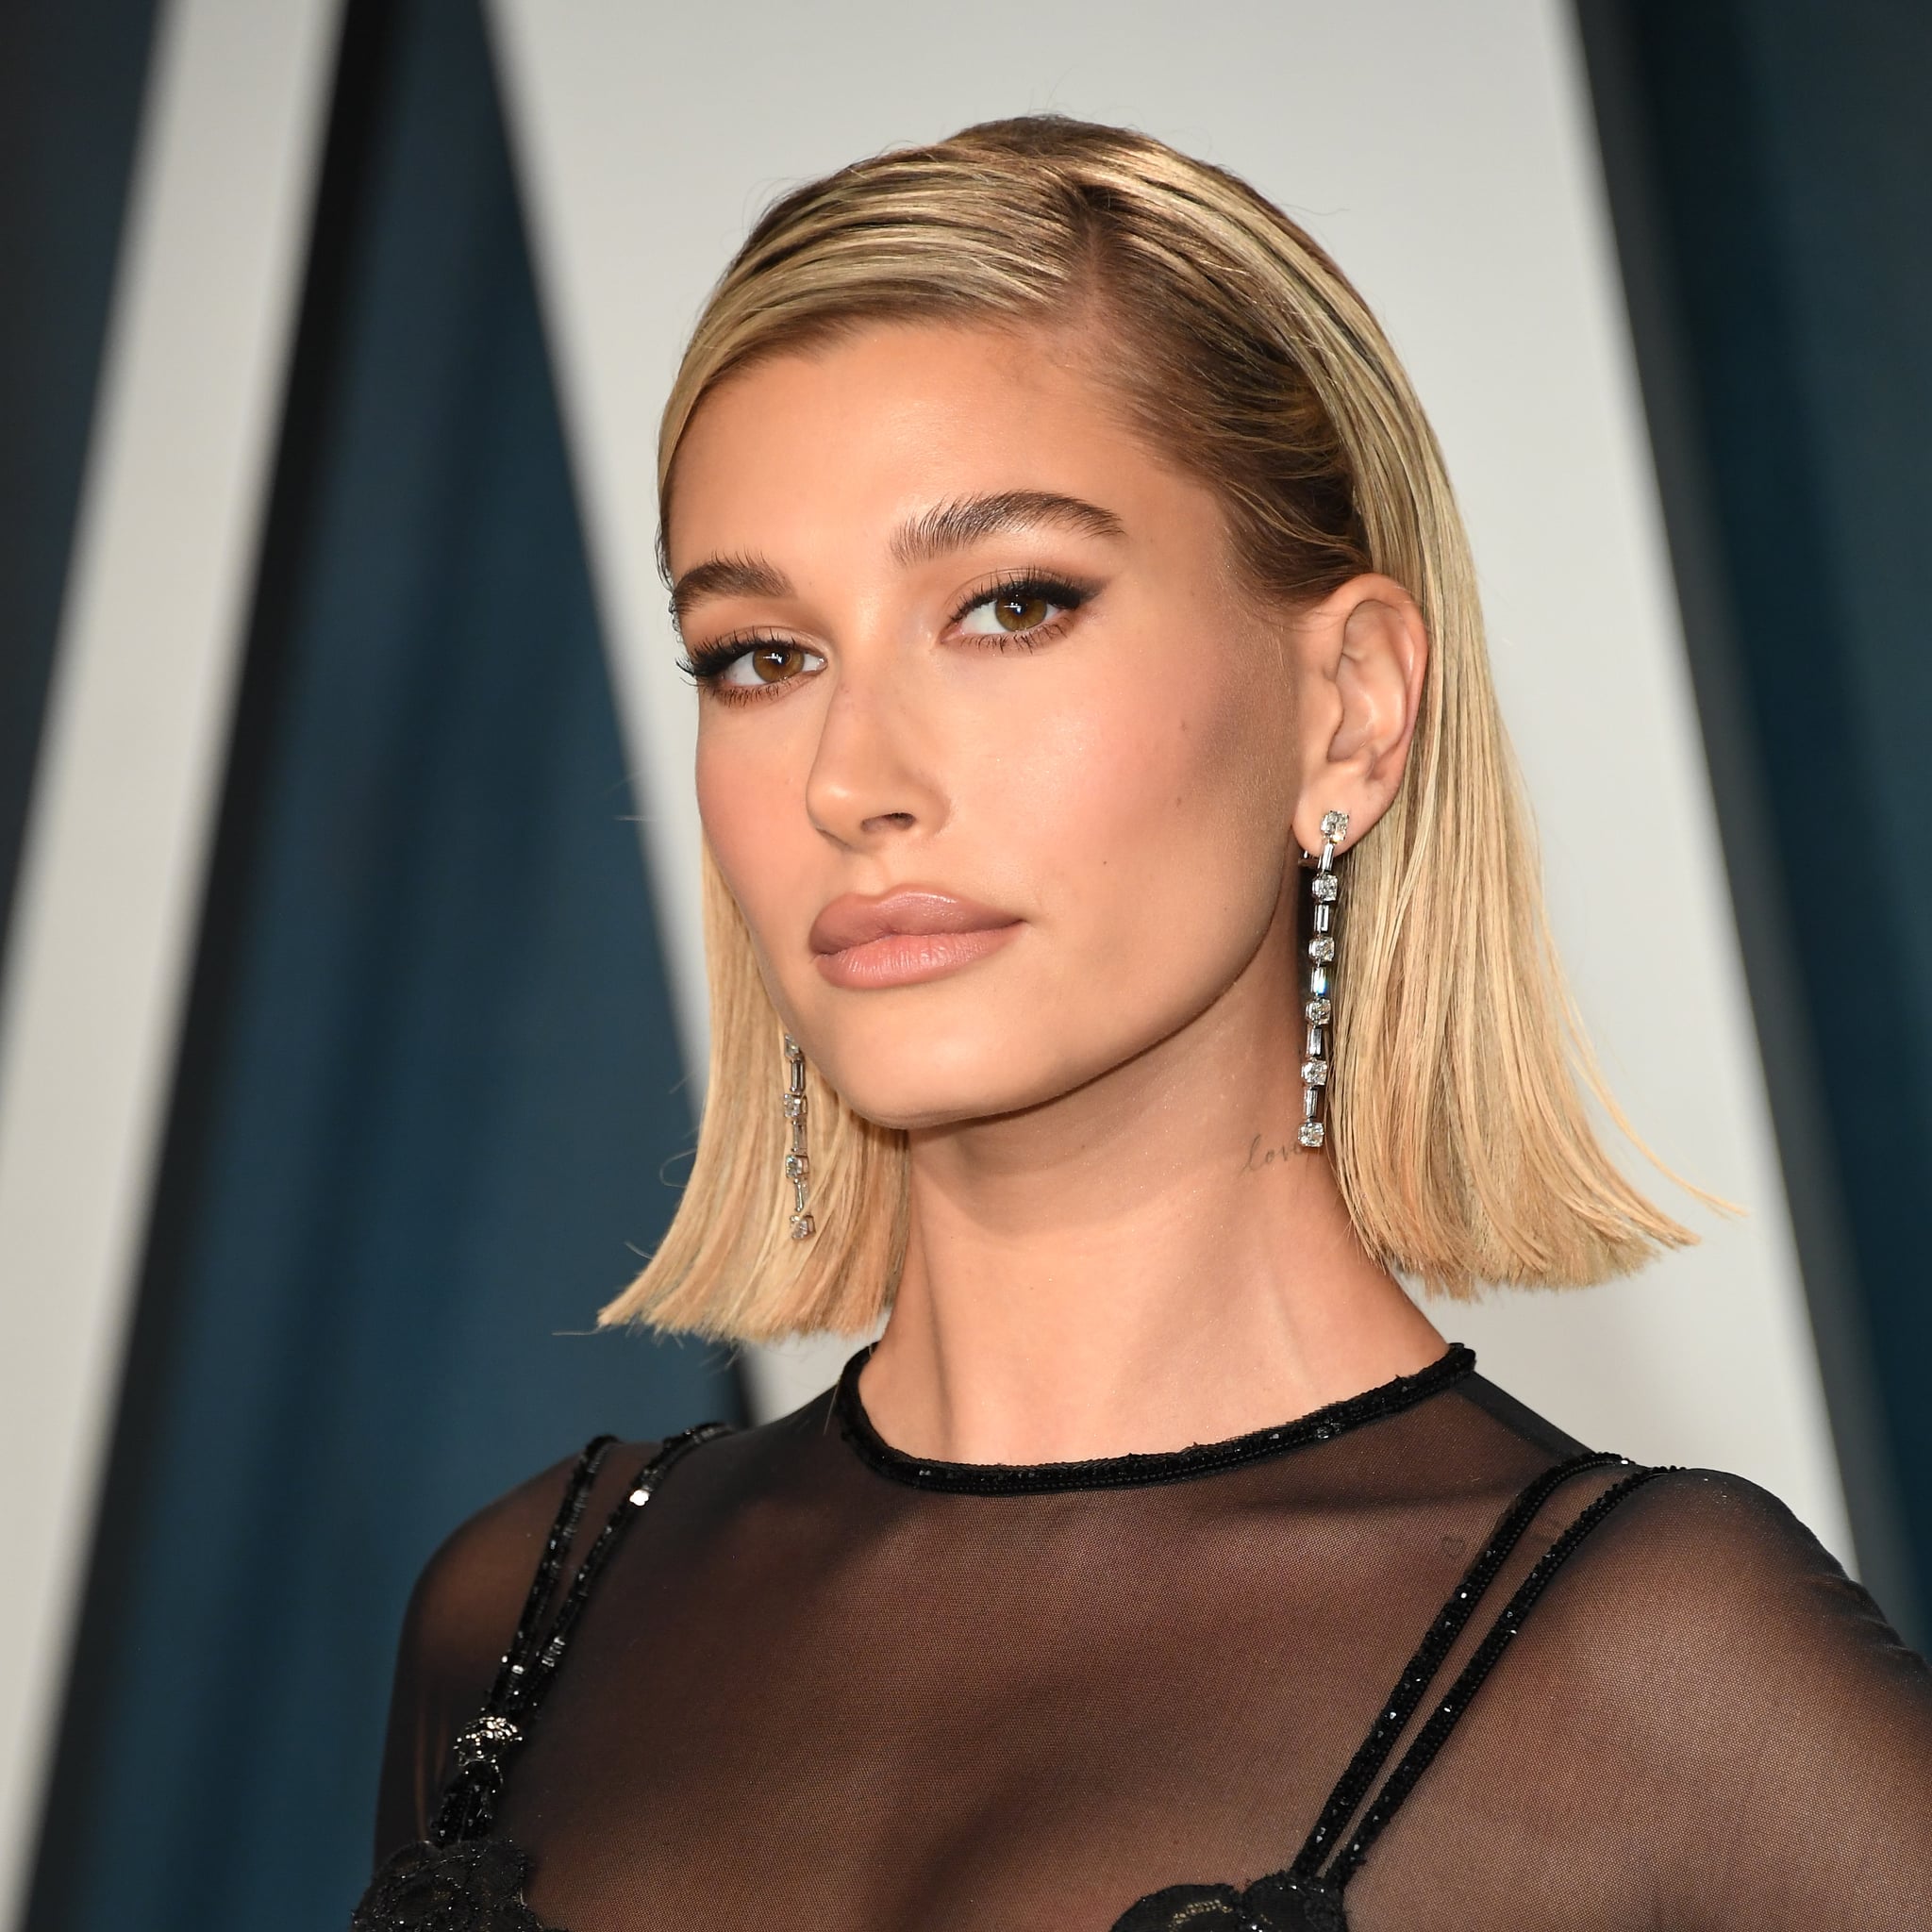 Hailey Bieber loves beauty trends from 90s